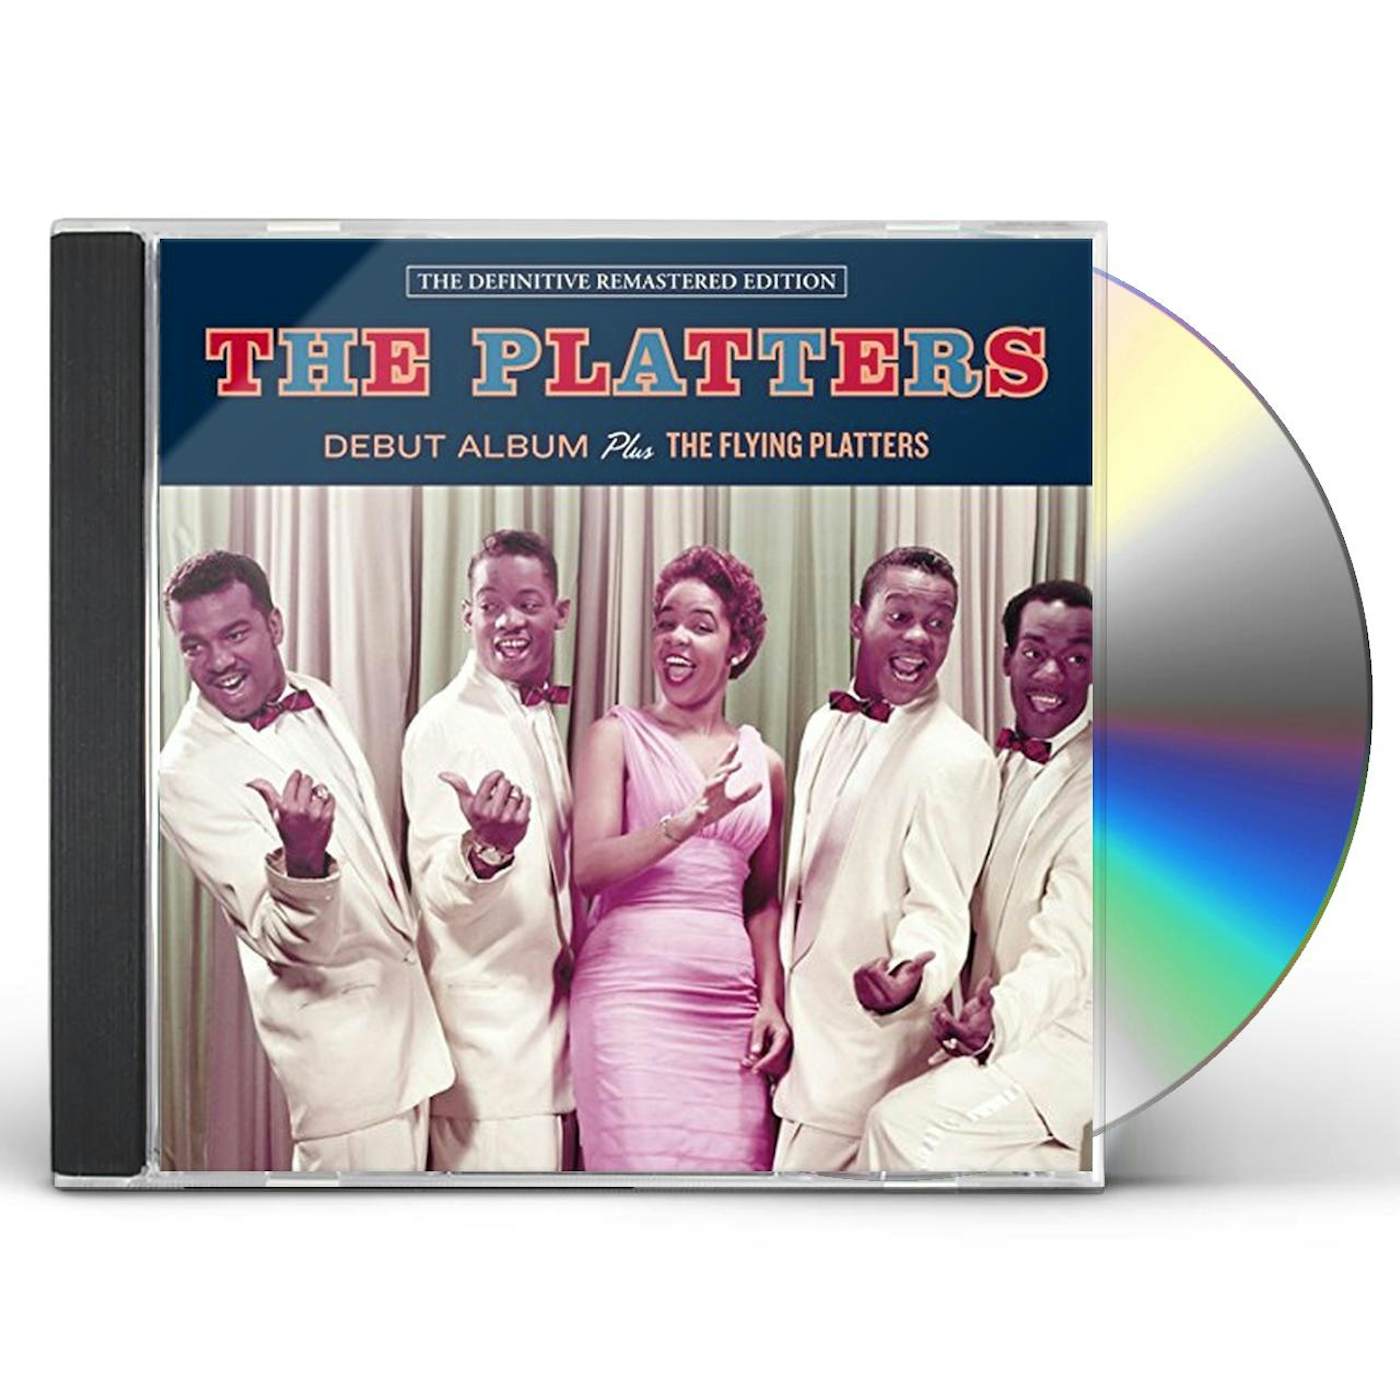 DEBUT ALBUM + THE FLYING The Platters CD